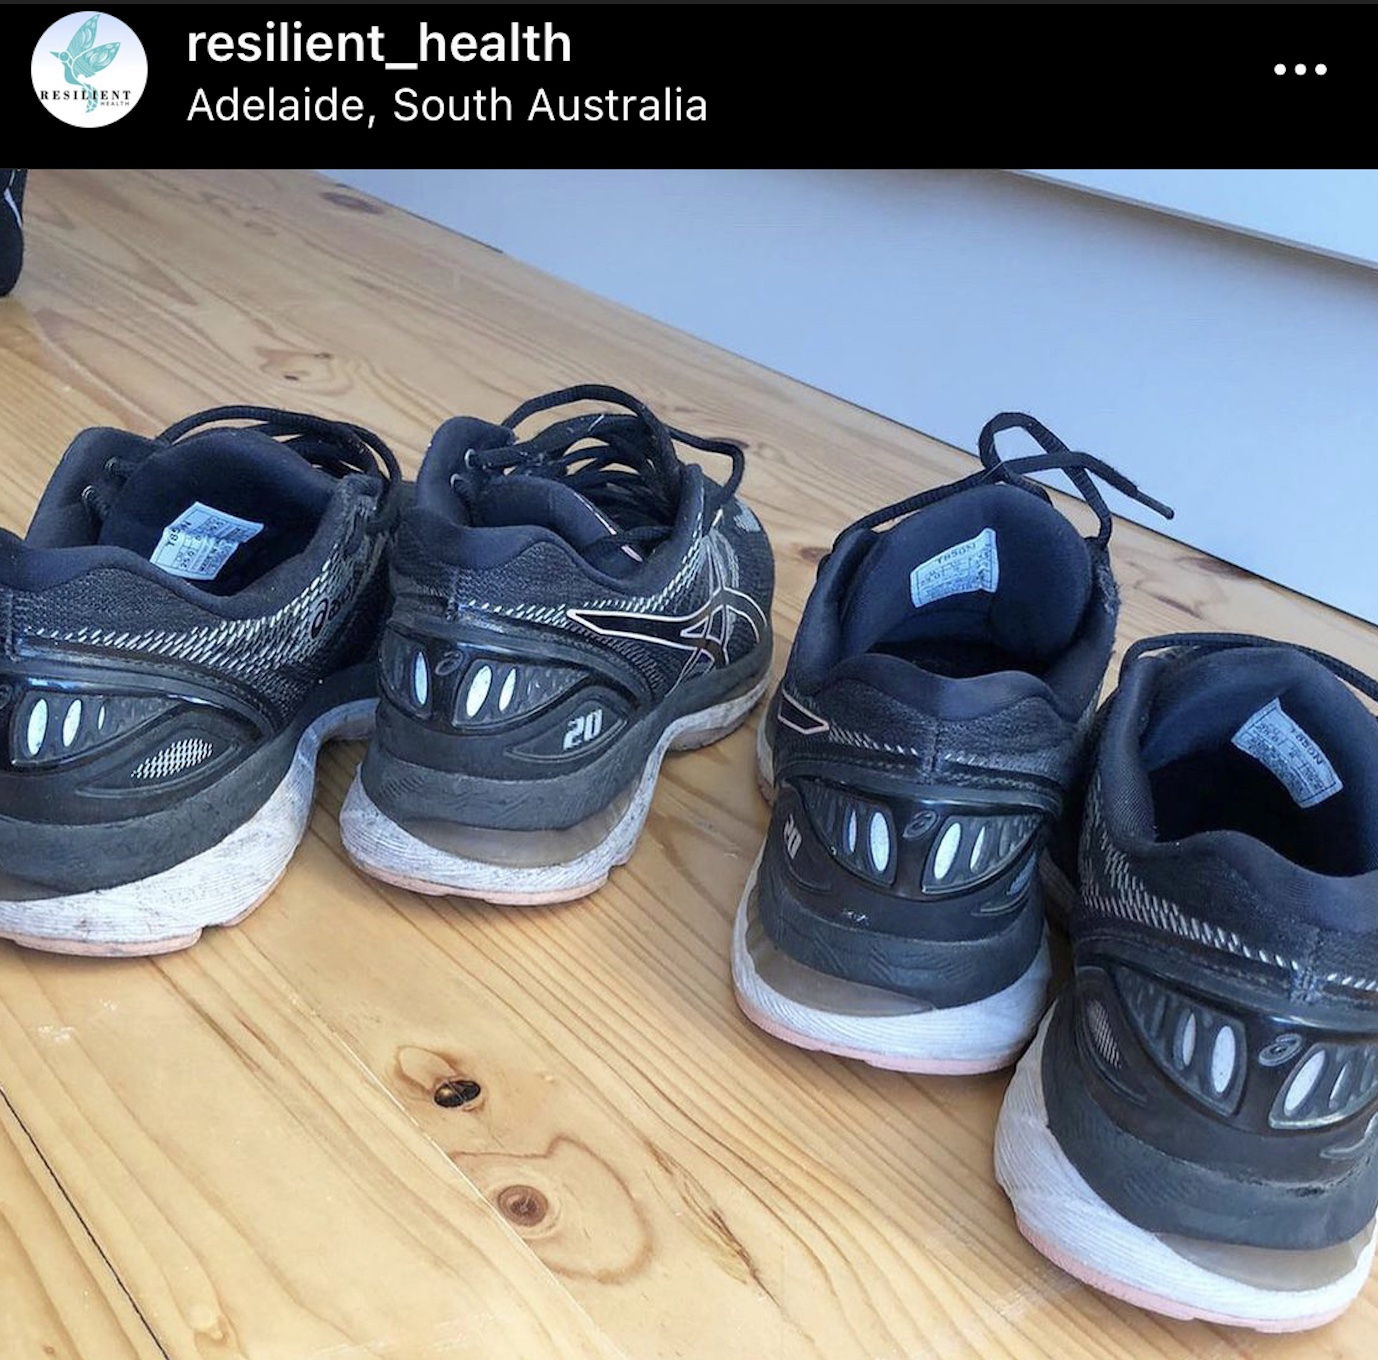 resilient health osteoapthy sports chiropractic sneakers adelaide south australia